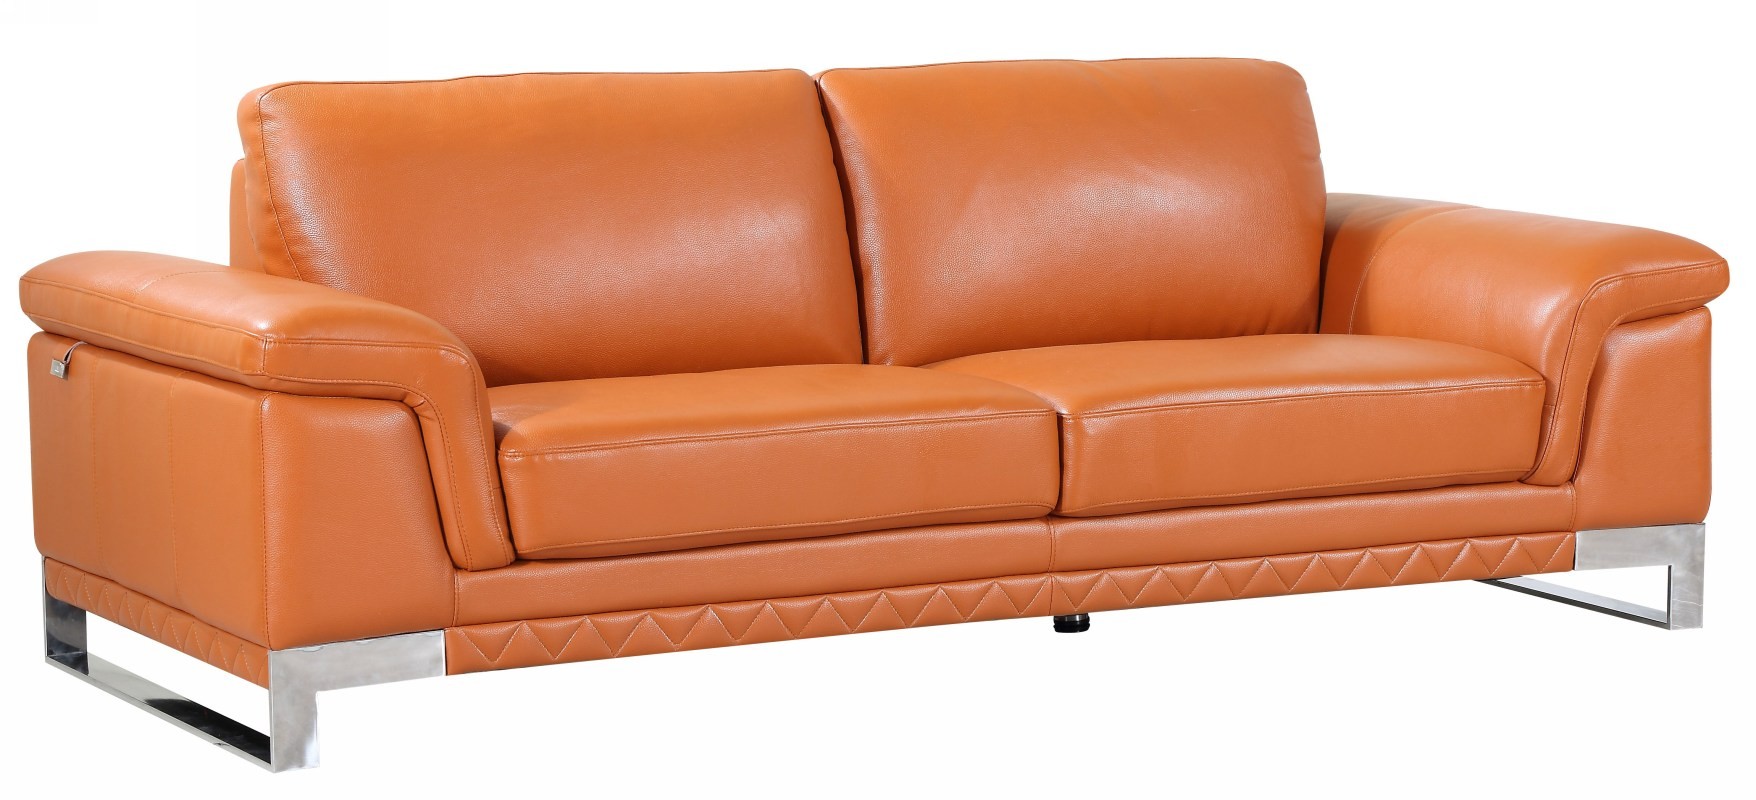 camel leather sofa with black cabinets